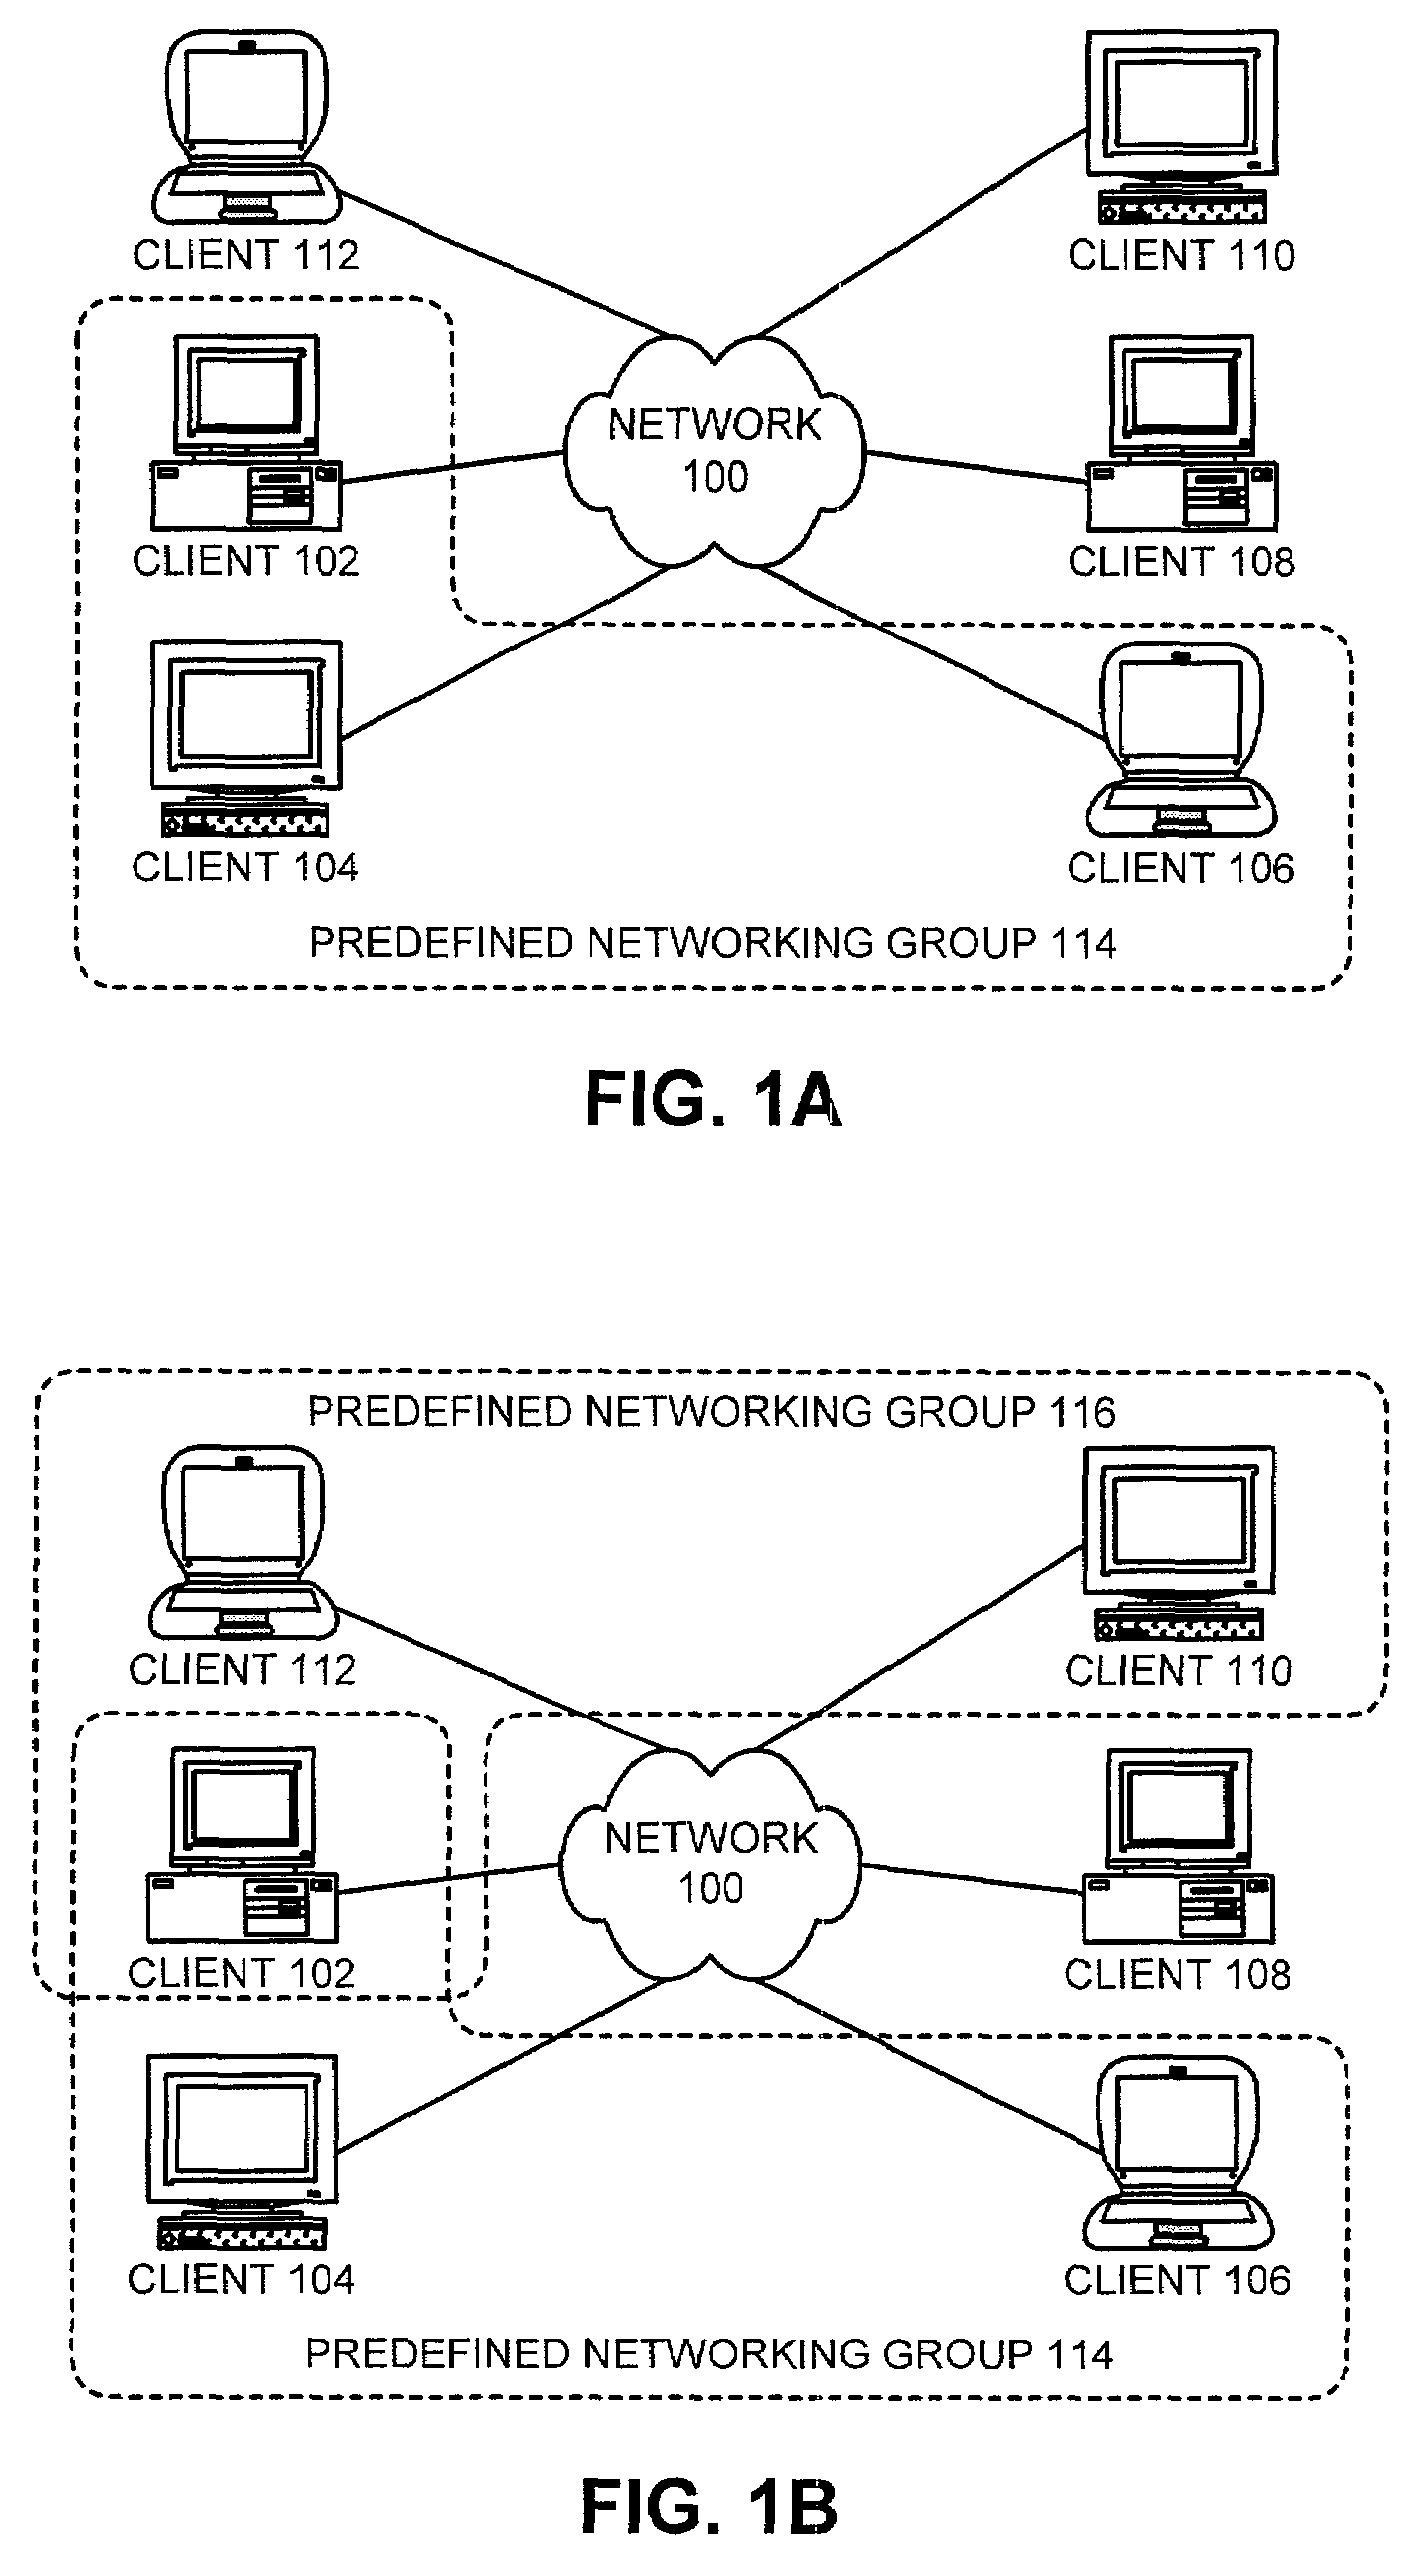 Method and apparatus for automatically using a predefined peer-to-peer group as a context for an application